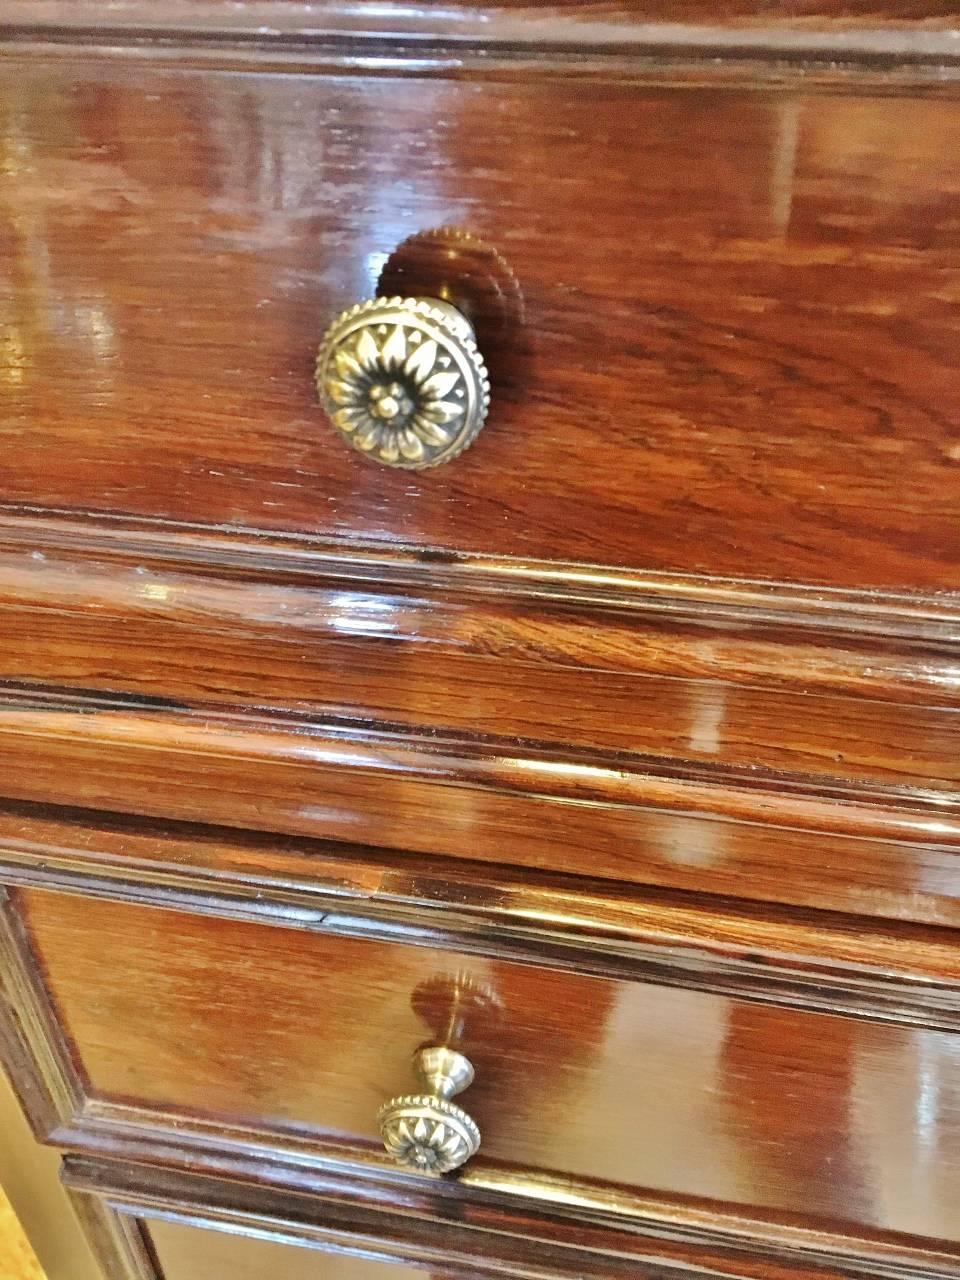 Attractive rosewood chest of drawers with marble-top in excellent condition, circa 1880.

This delightful chest has seven smoothly running drawers with brass handles and keys. The drawers are constructed in solid ash or oak with well figured